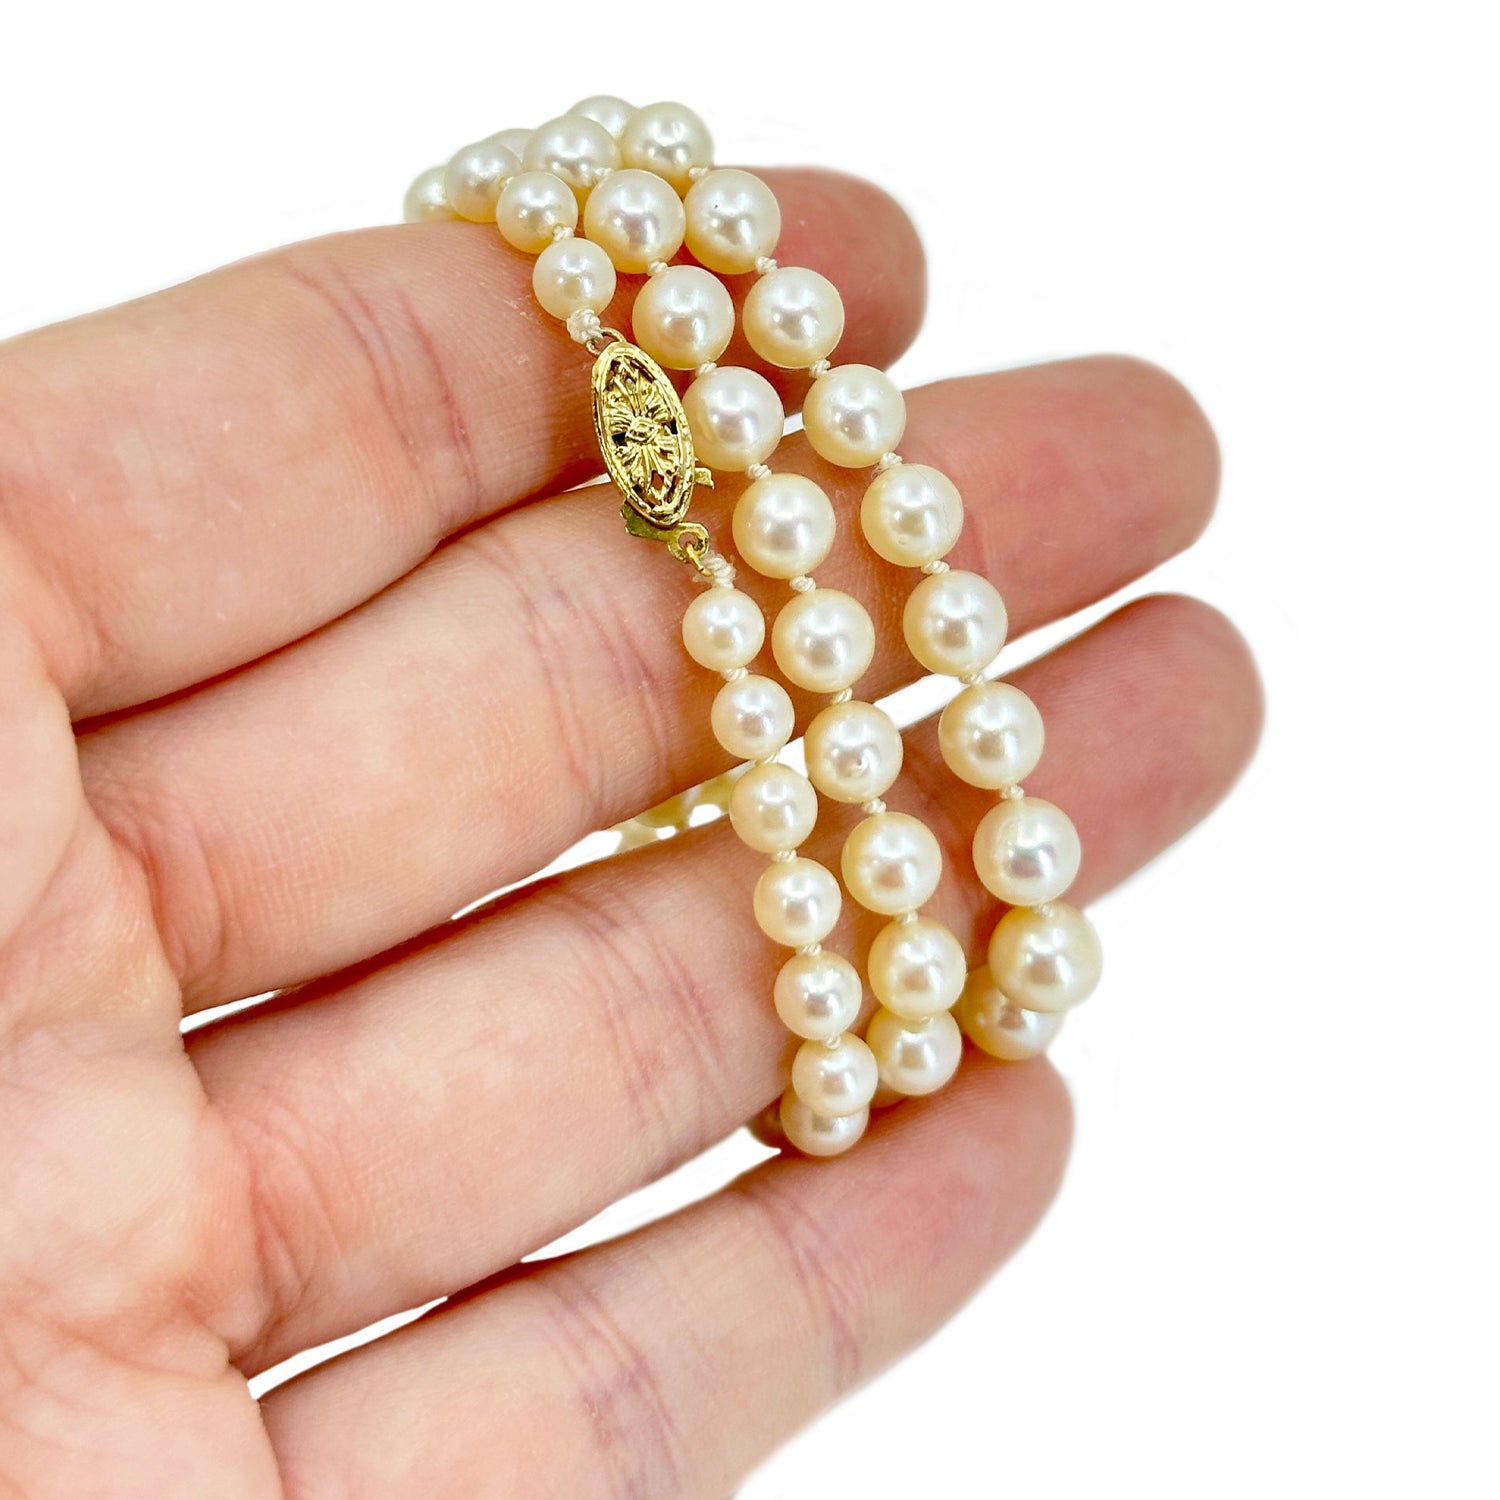 Floral High Quality Graduated Japanese Cultured Saltwater Akoya Pearl Necklace - 14K Yellow Gold 16.75 Inch